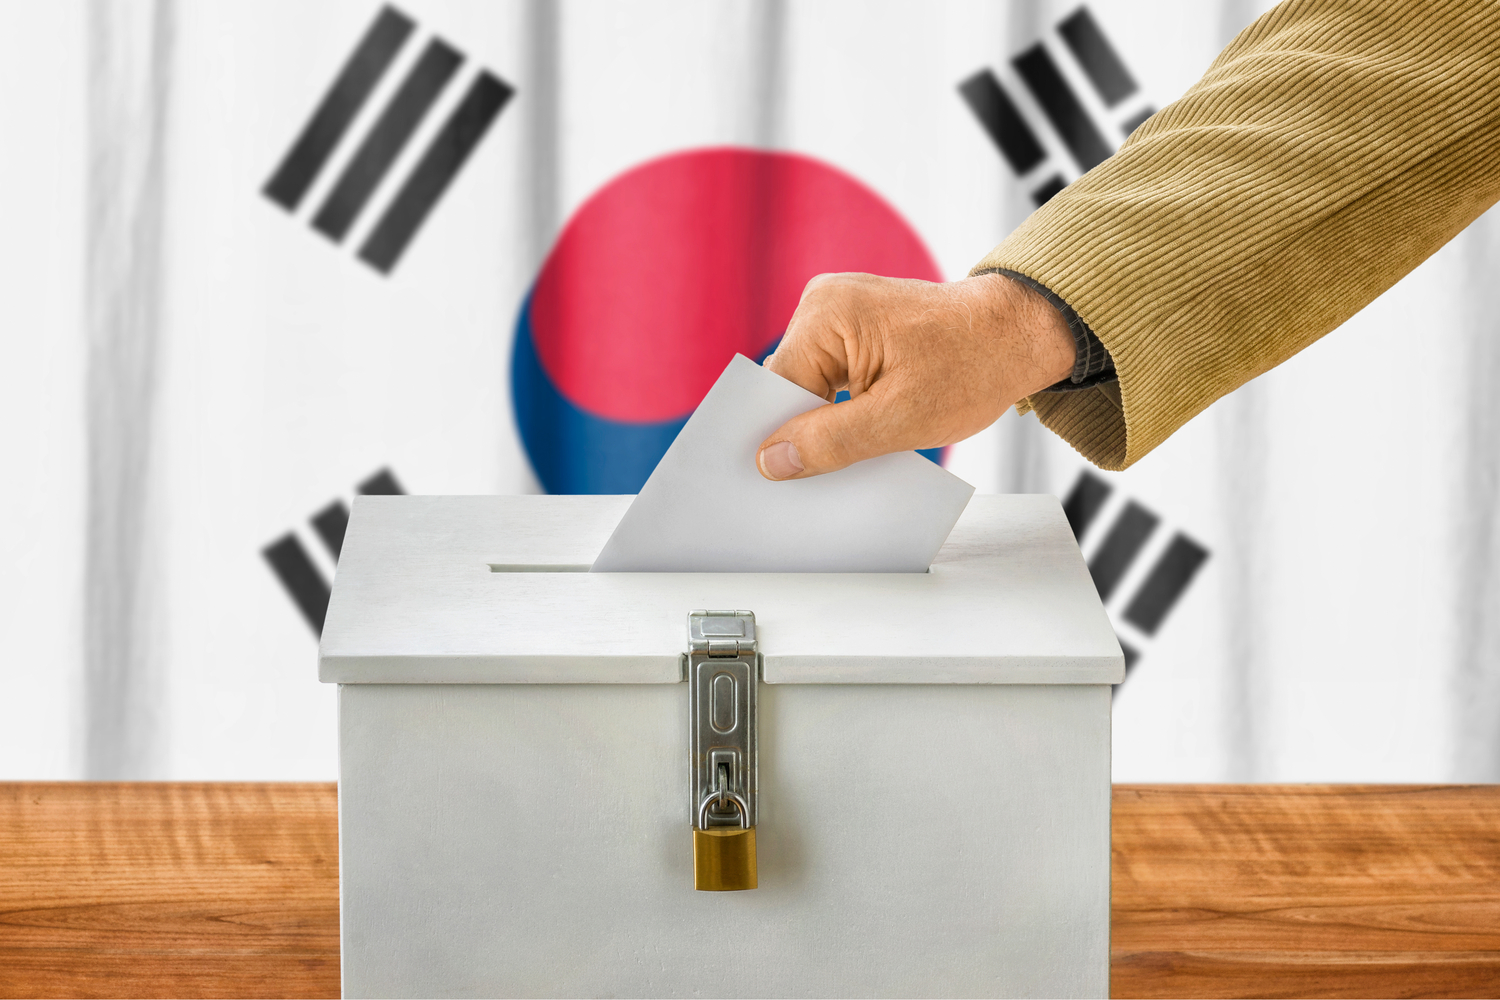 South Korea Eyes More Reliable E-Voting With December Blockchain Trial